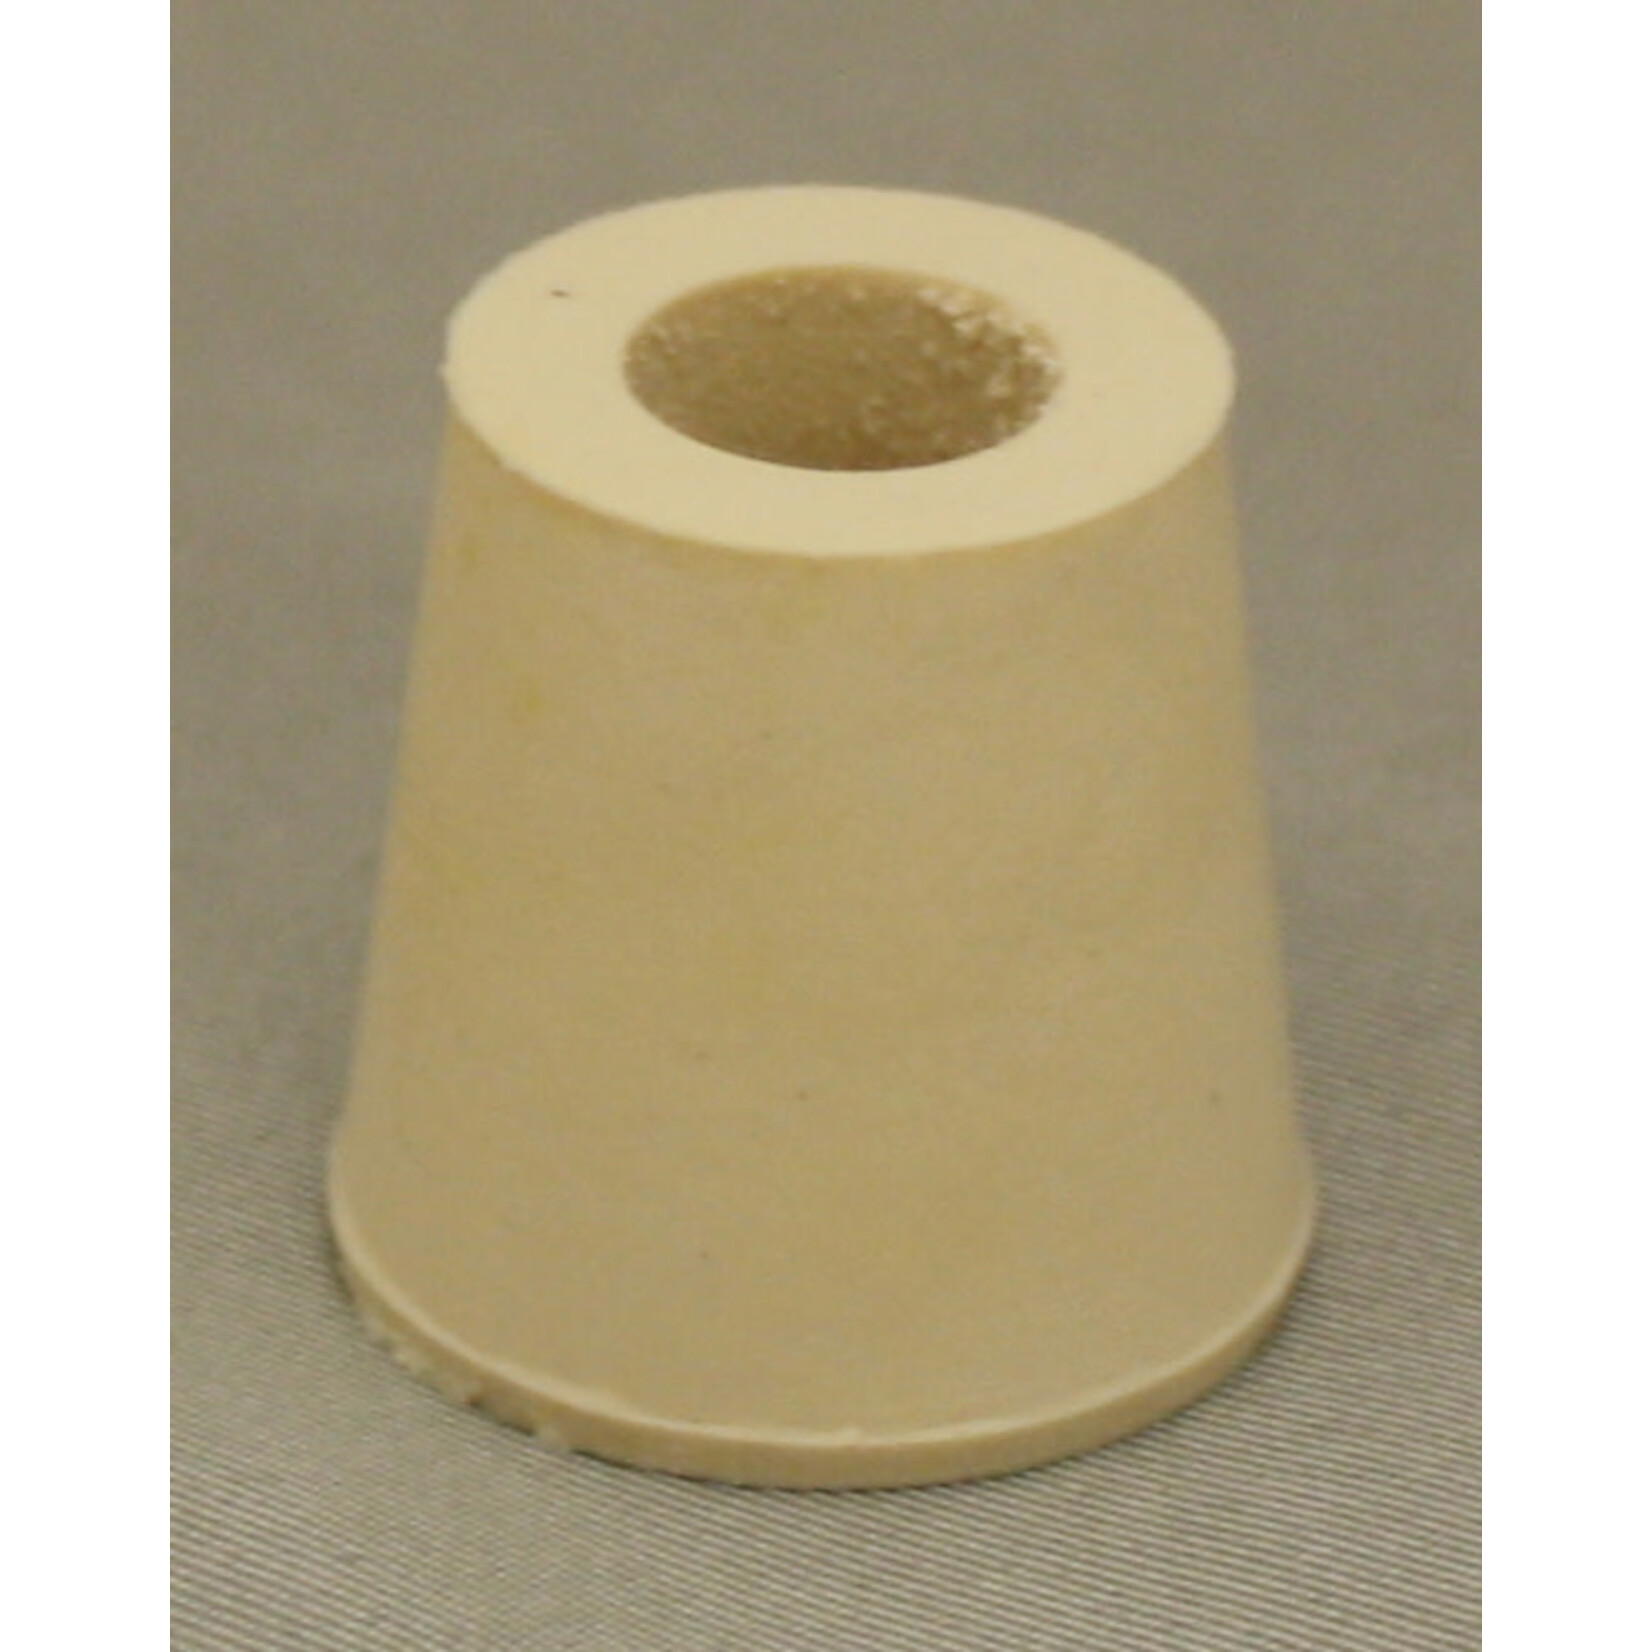 #3 Drilled Stopper